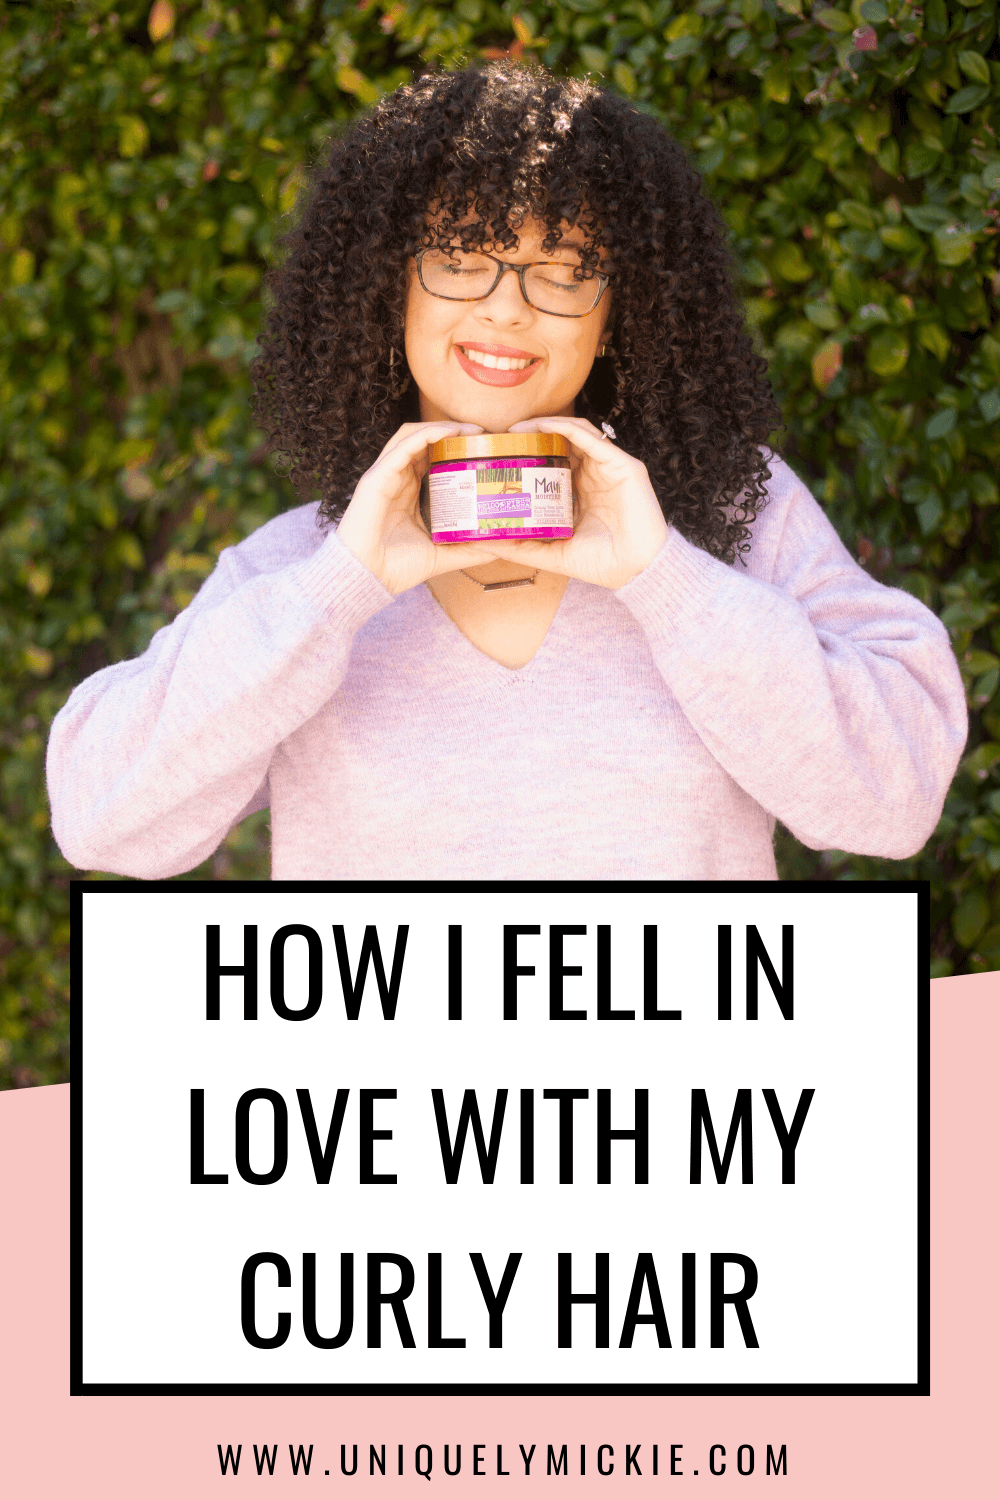 In today’s blog post, I’m teaming up with Maui Moisture to share my curly hair journey and my favorite products from the Maui Moisture Heal & Hydrate line. #AD #AloeForCurls #MauiMoisture 